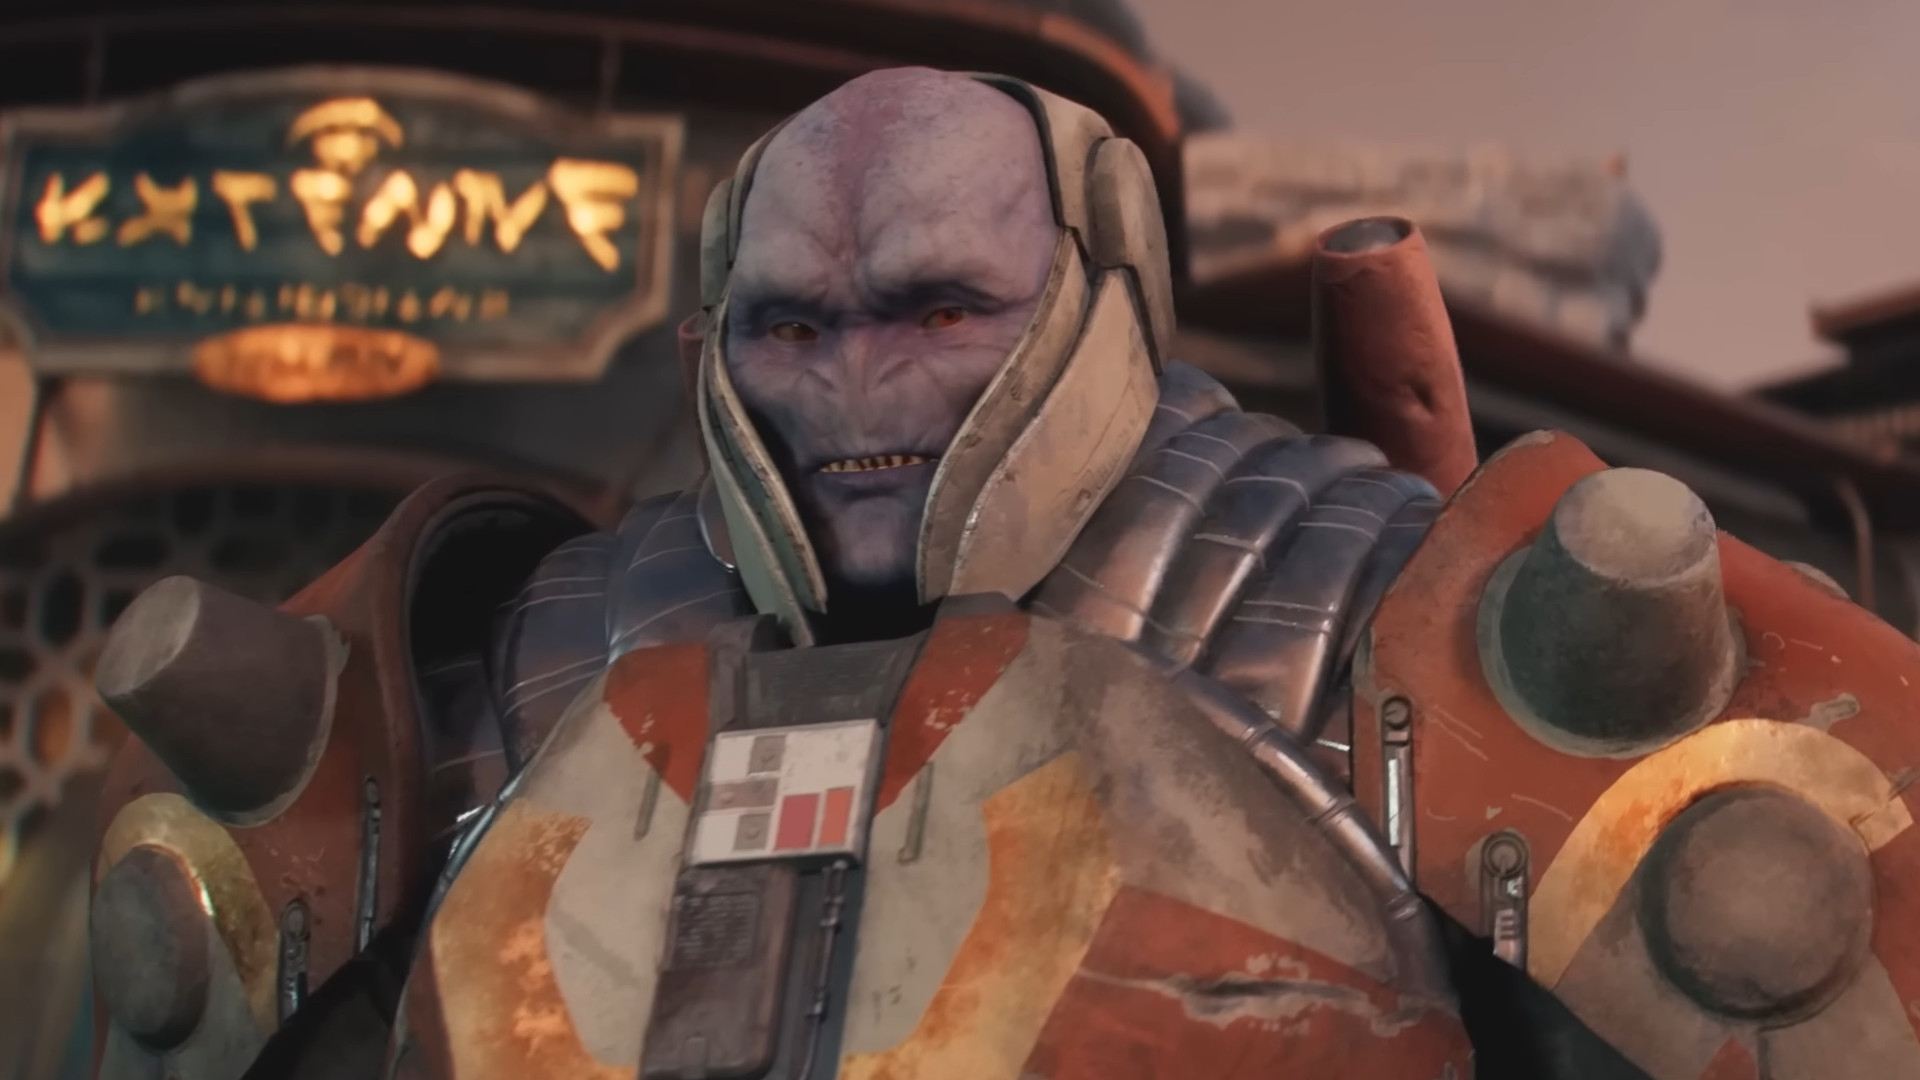 Star Wars Jedi Survivor Characters: Rayvis can be seen